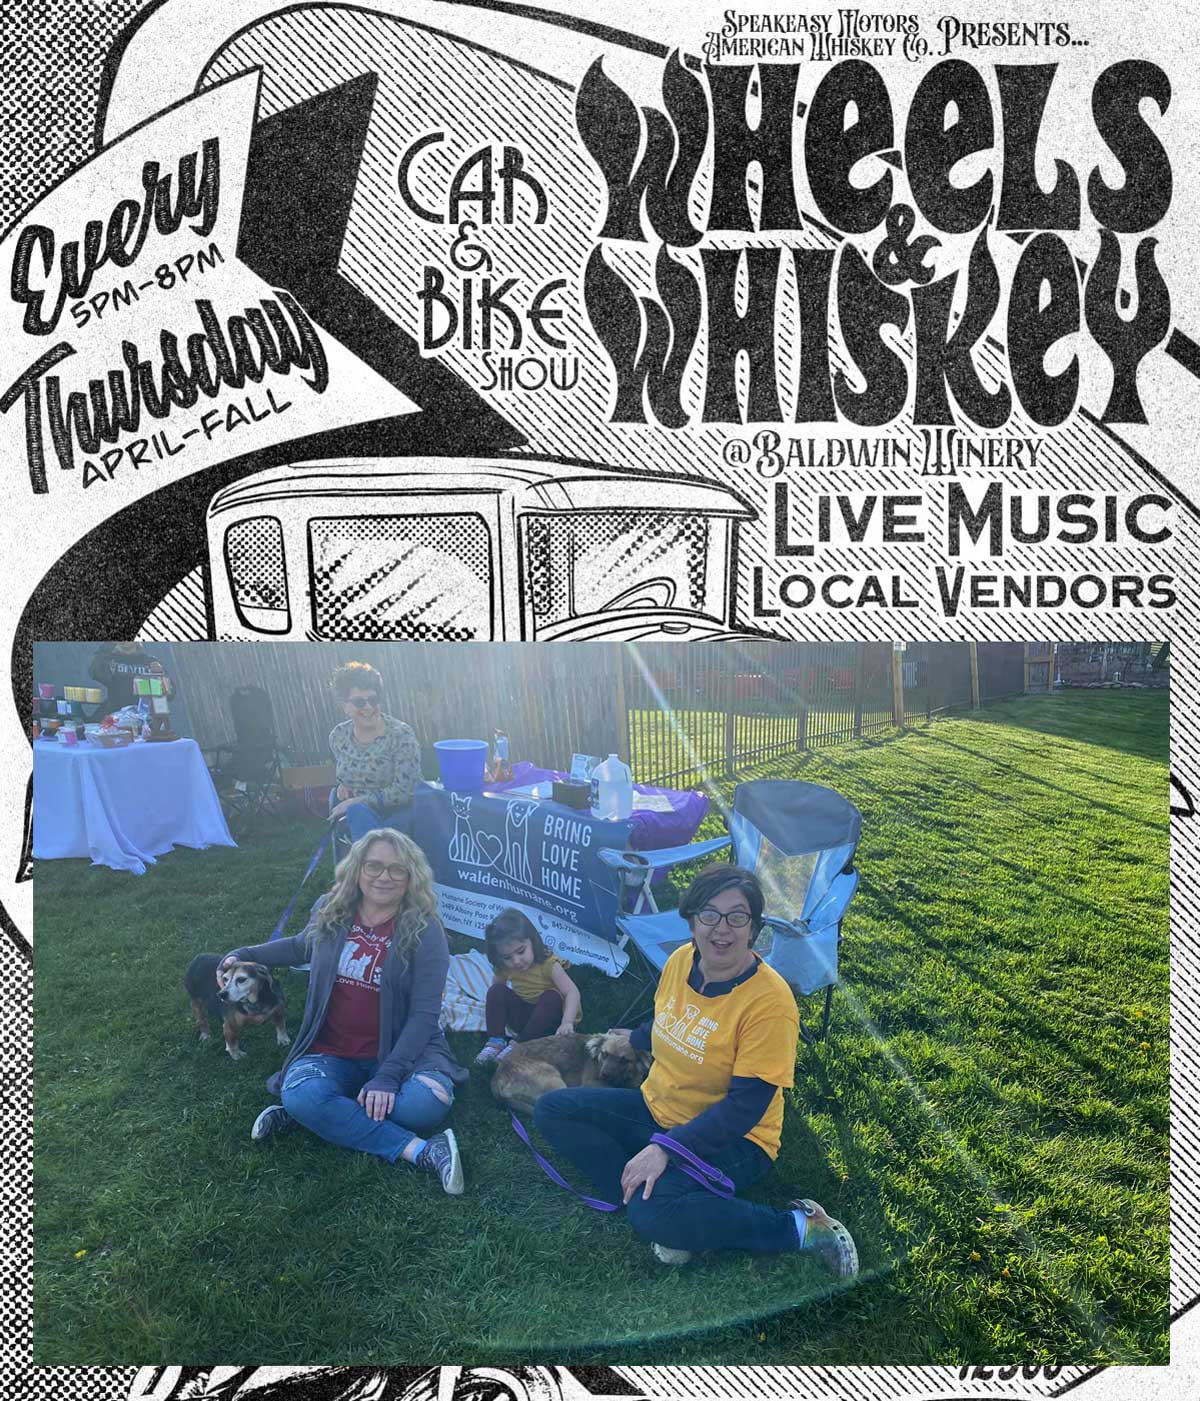 Wheels and Whiskey